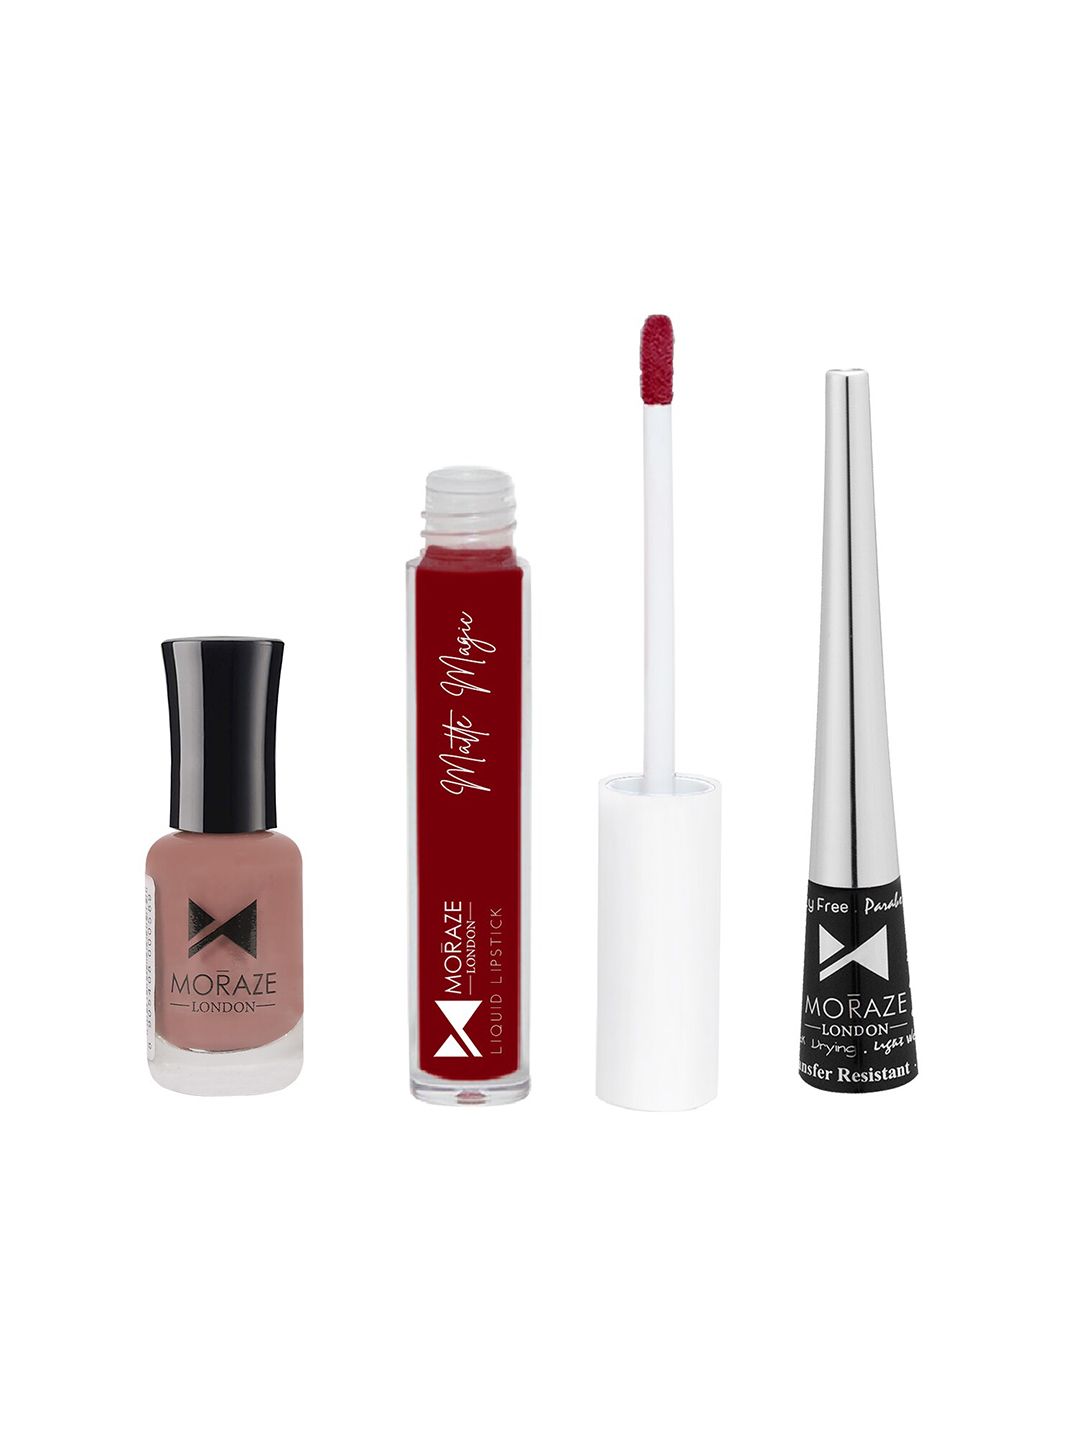 Moraze Nude Nail Polish (Purple) With 1 Lipstick (Angle) and 1 Eyeliner Combo Pack Price in India